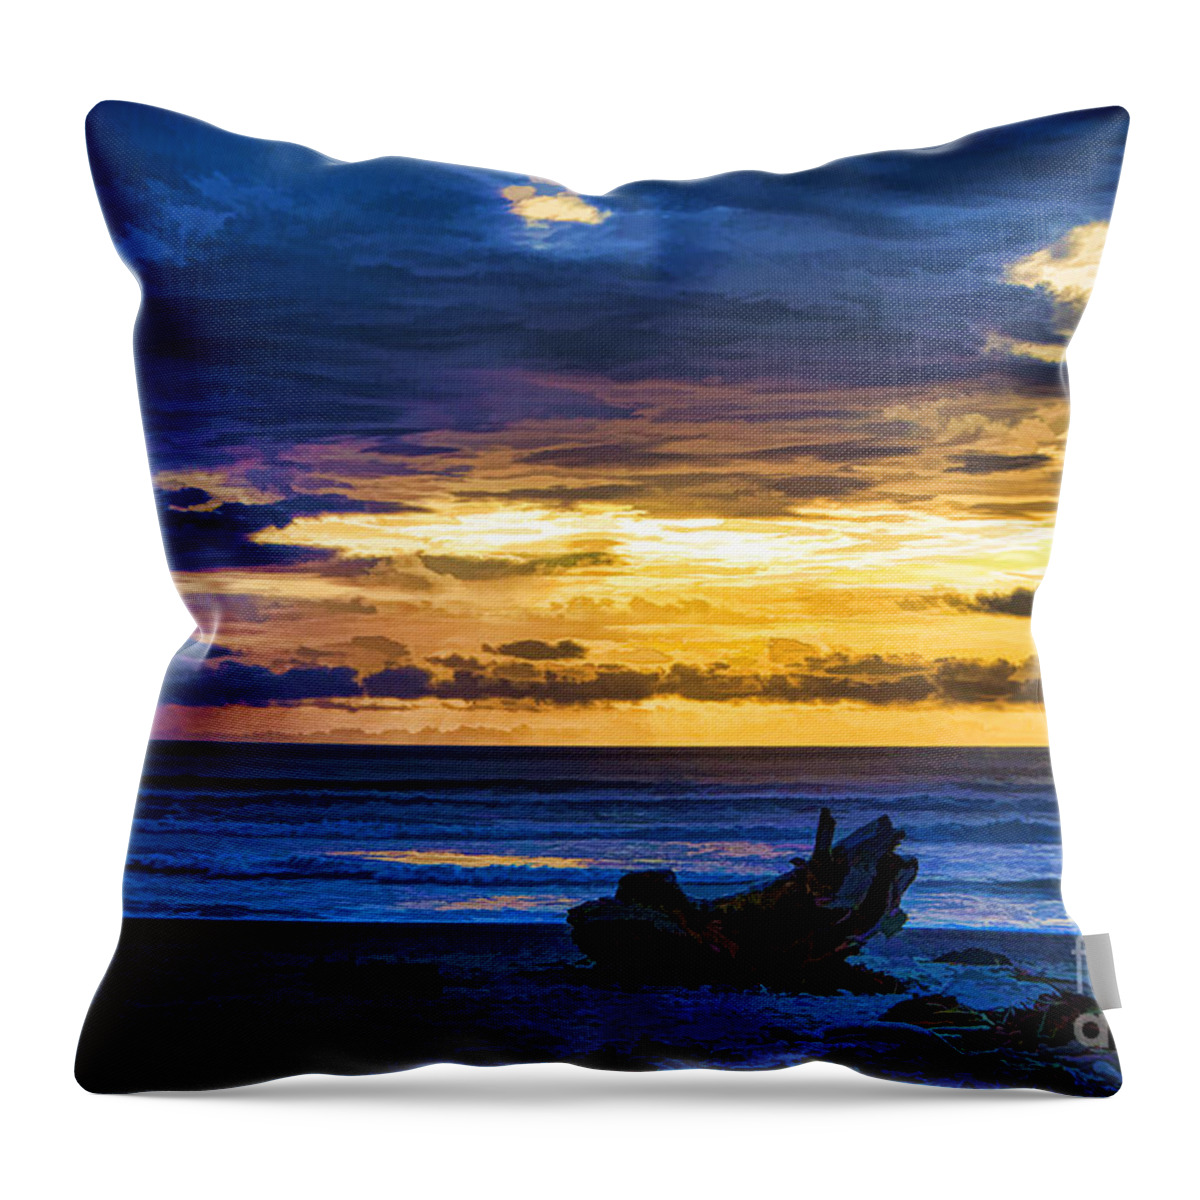 New Zealand Sunsets Beaches Nature Throw Pillow featuring the photograph The Last Boat by Rick Bragan